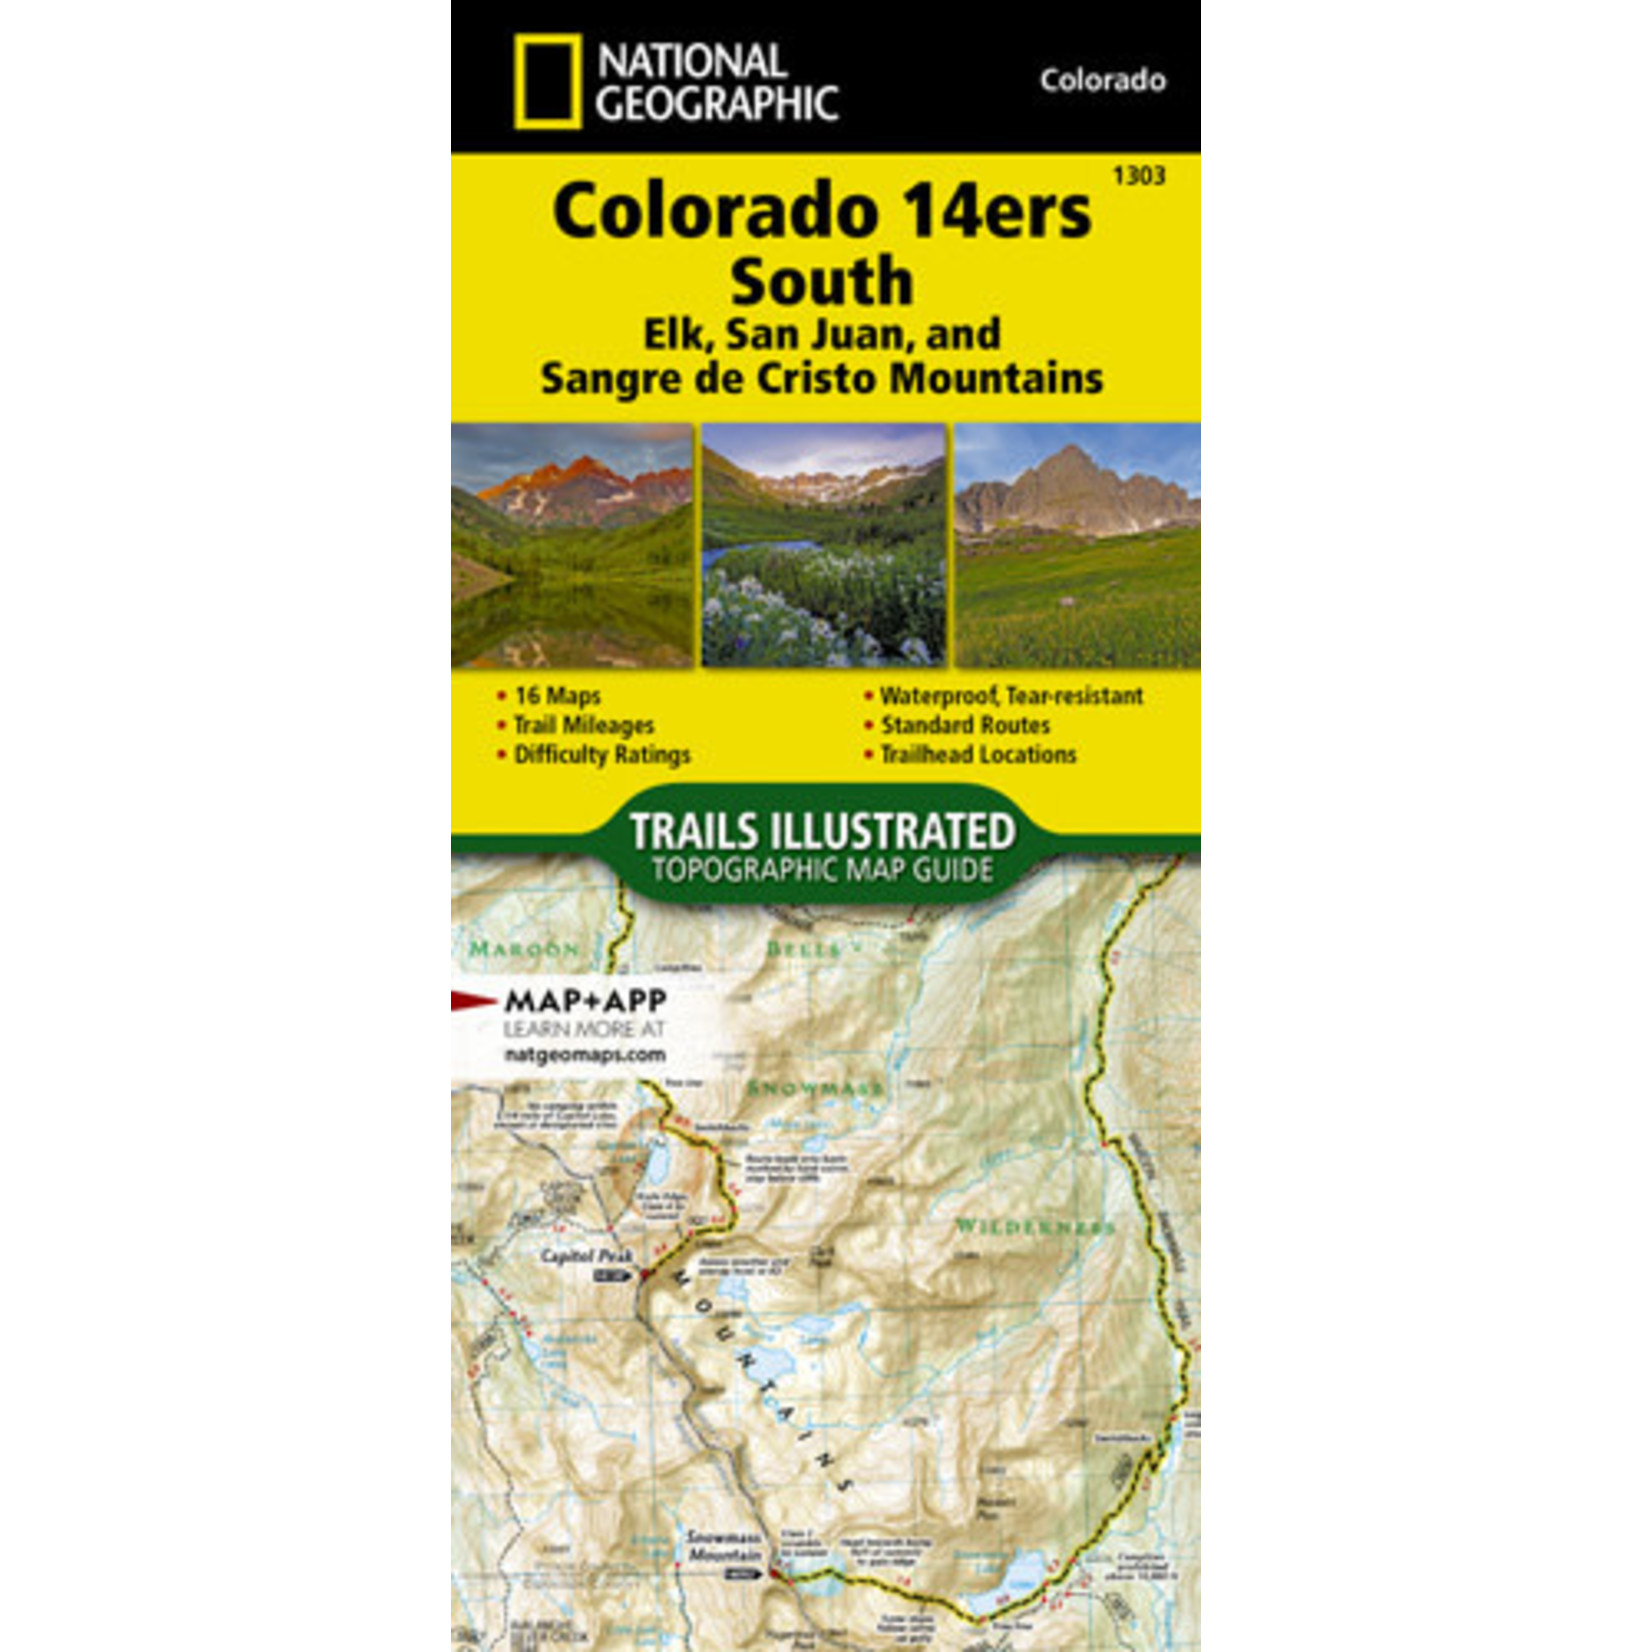 National Geographic Maps National Geographic Colorado 14ers South #1303